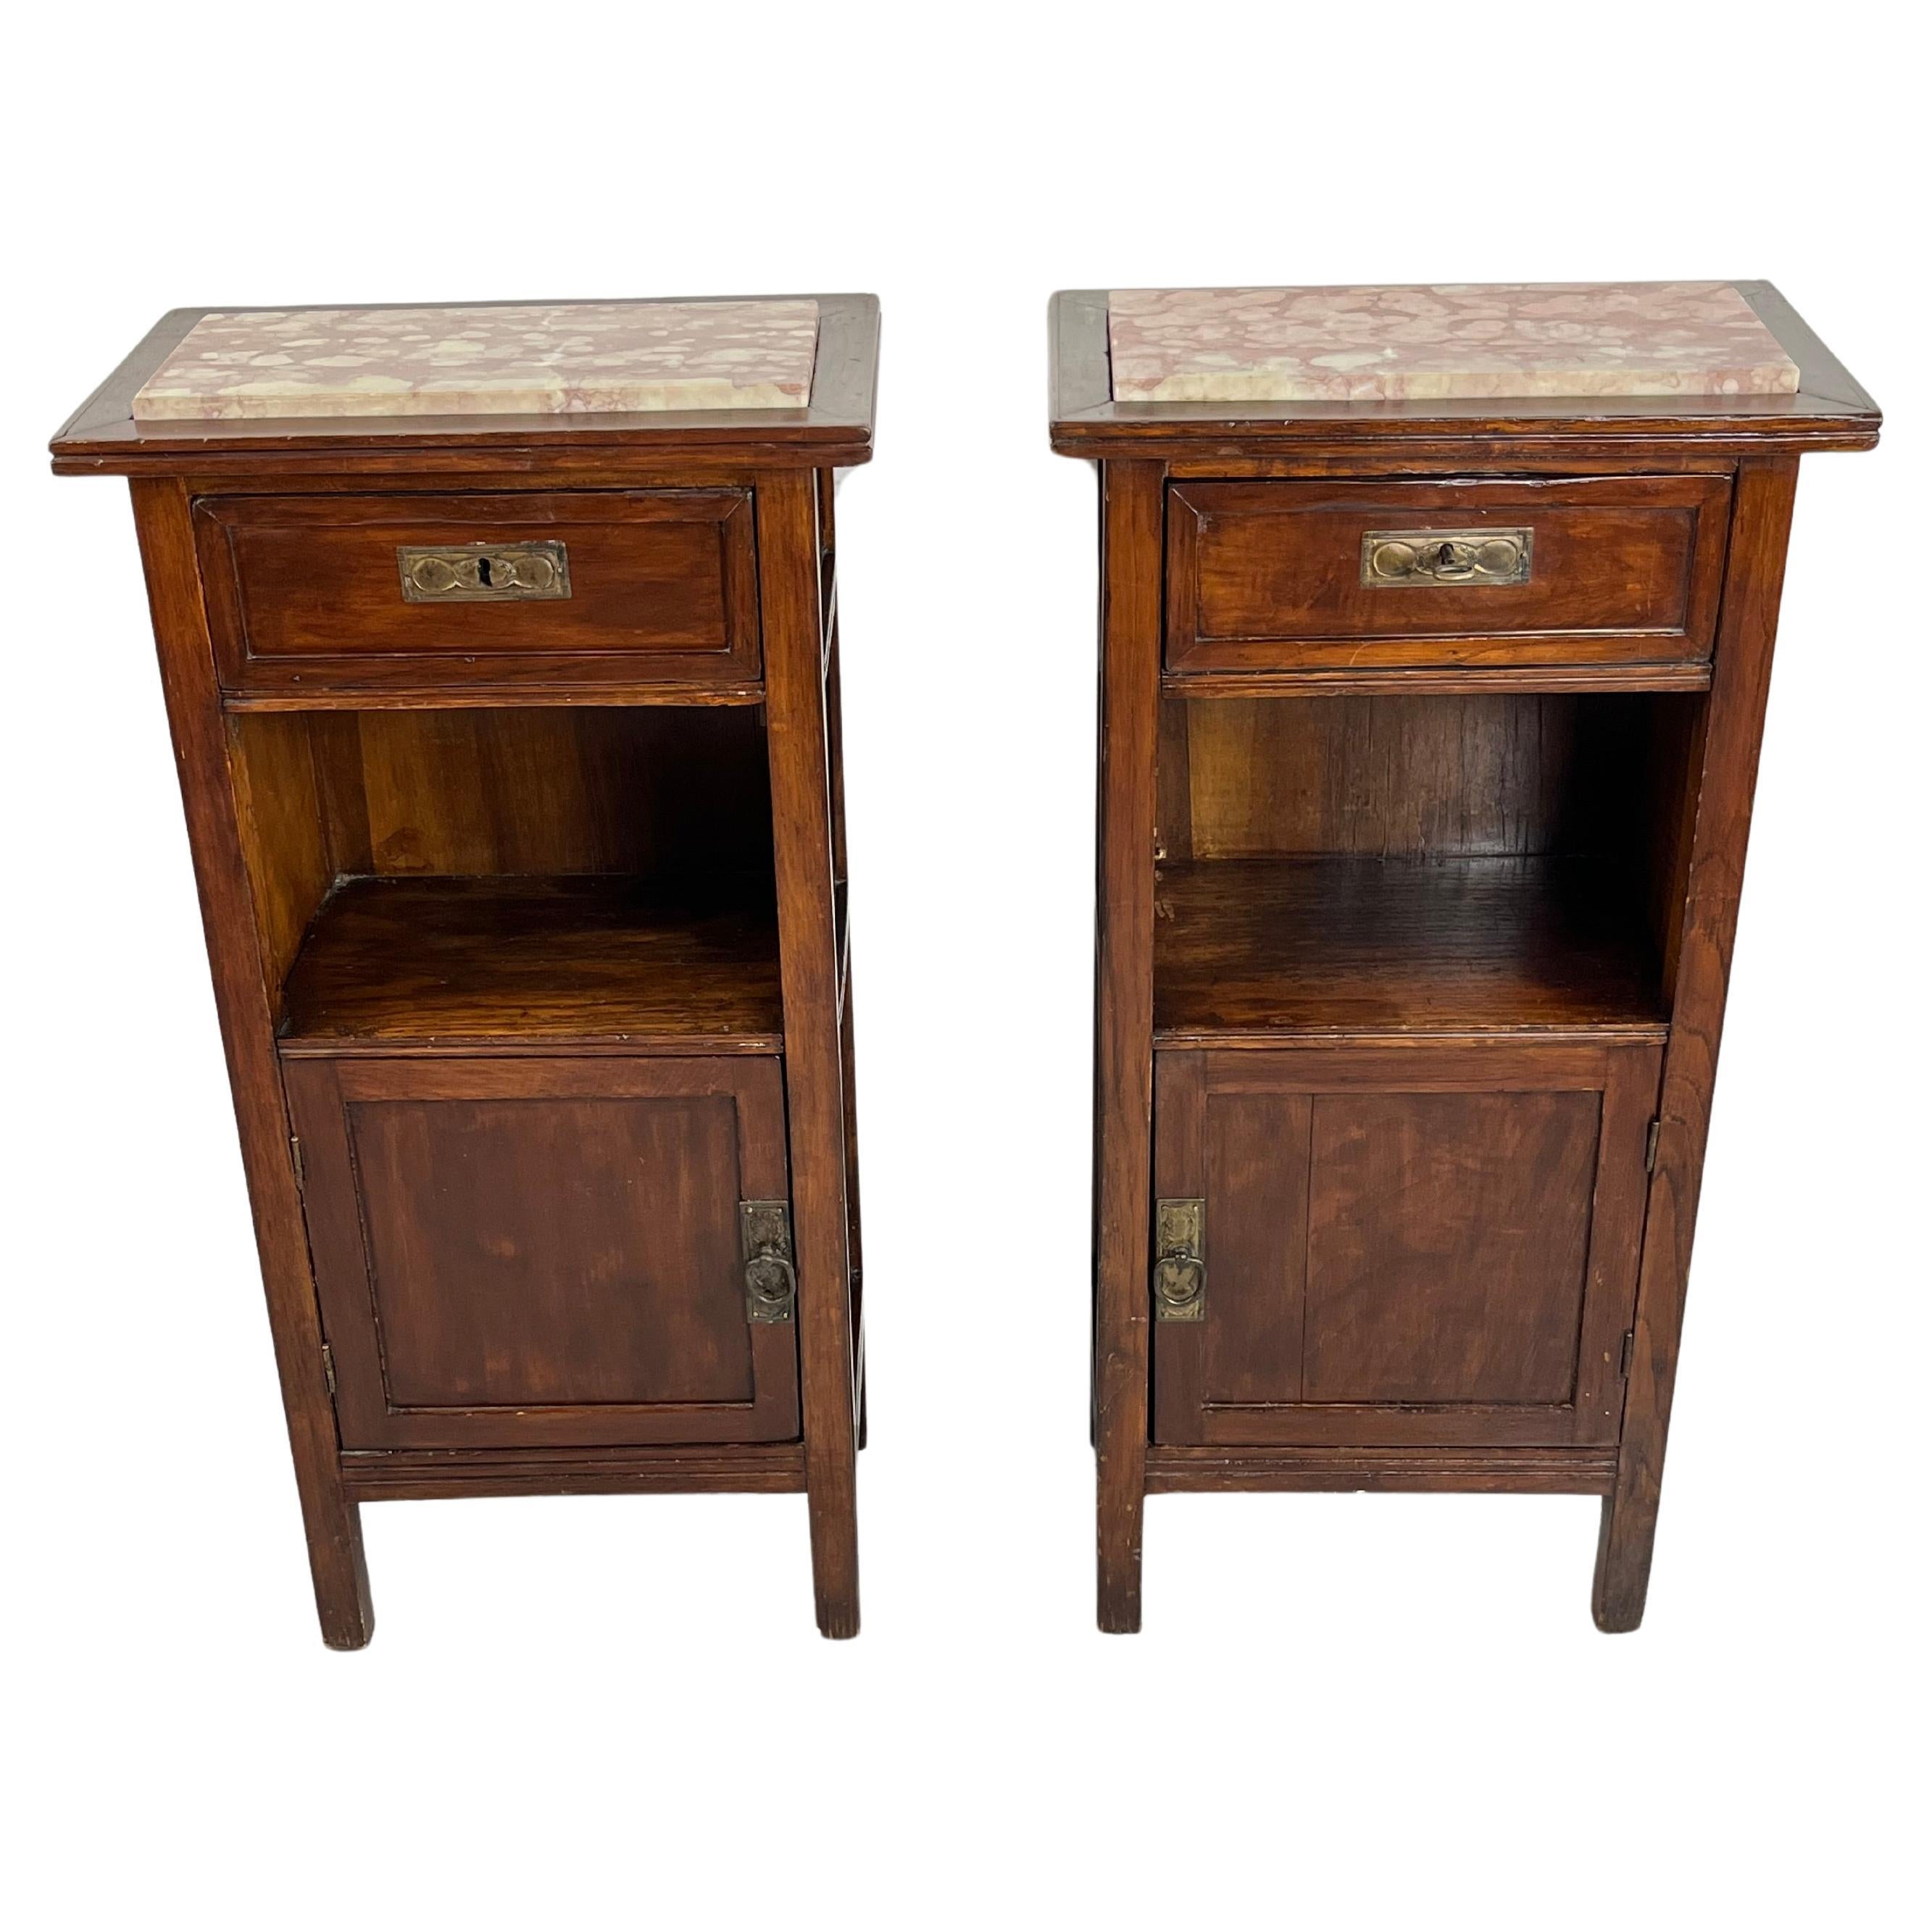 Set Of 2 Mid-Century Sicilian Wood And Marble Bedside Tables 1930s For Sale